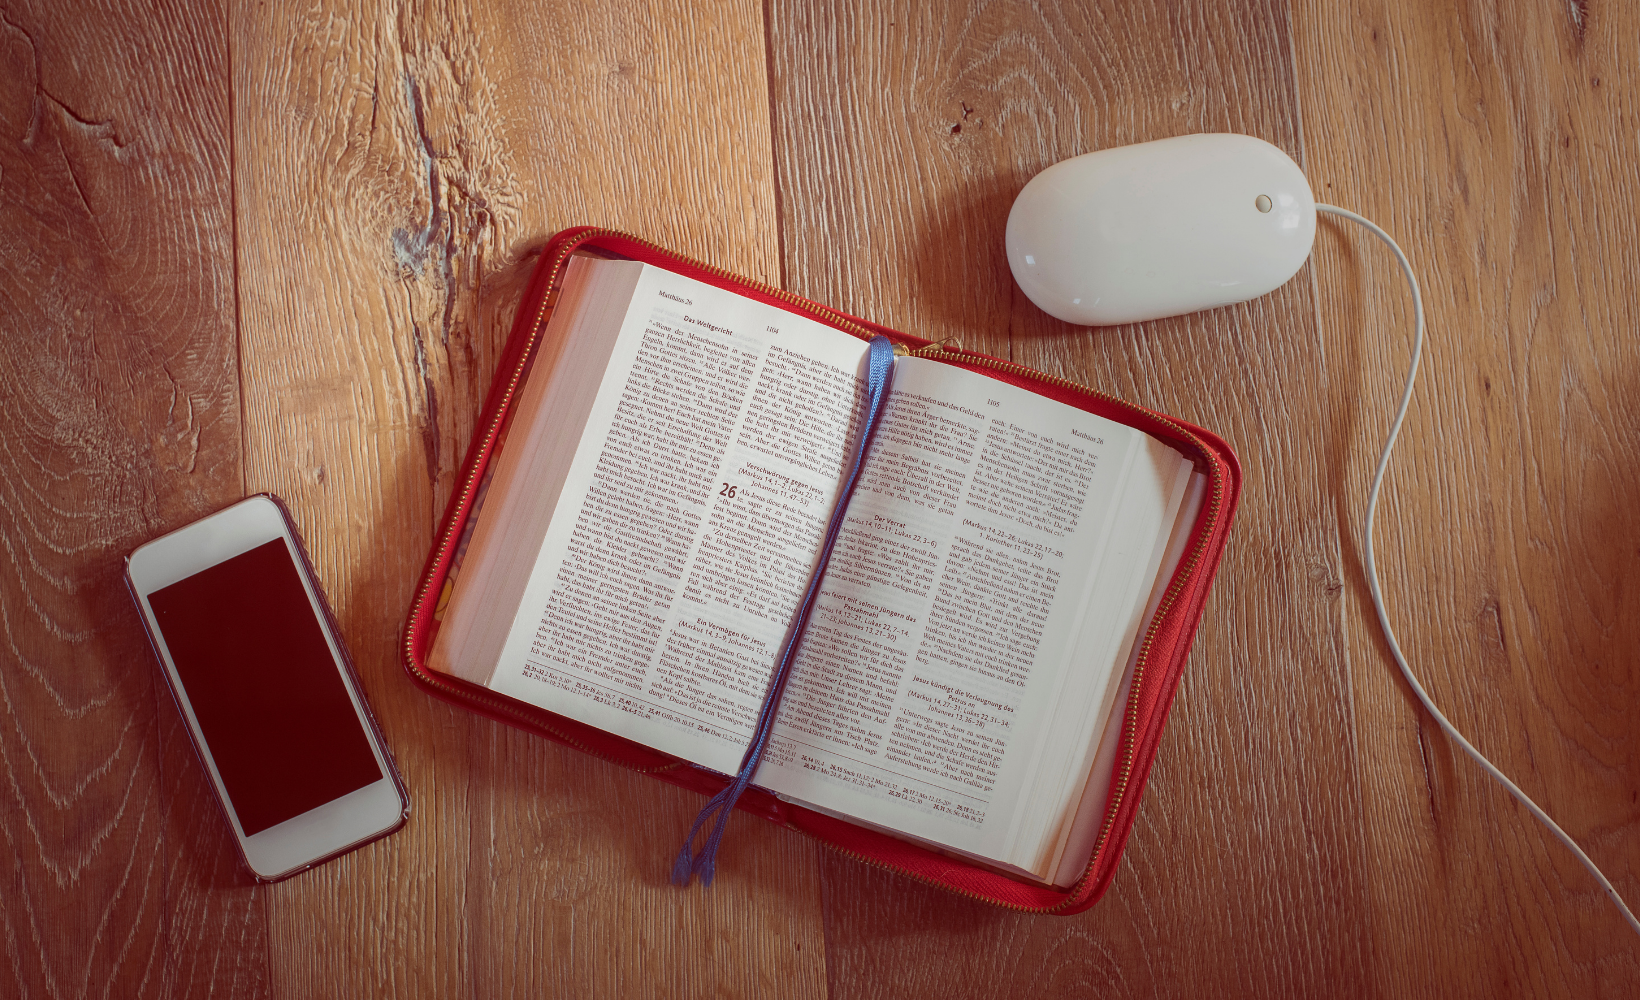 Bible and a phone